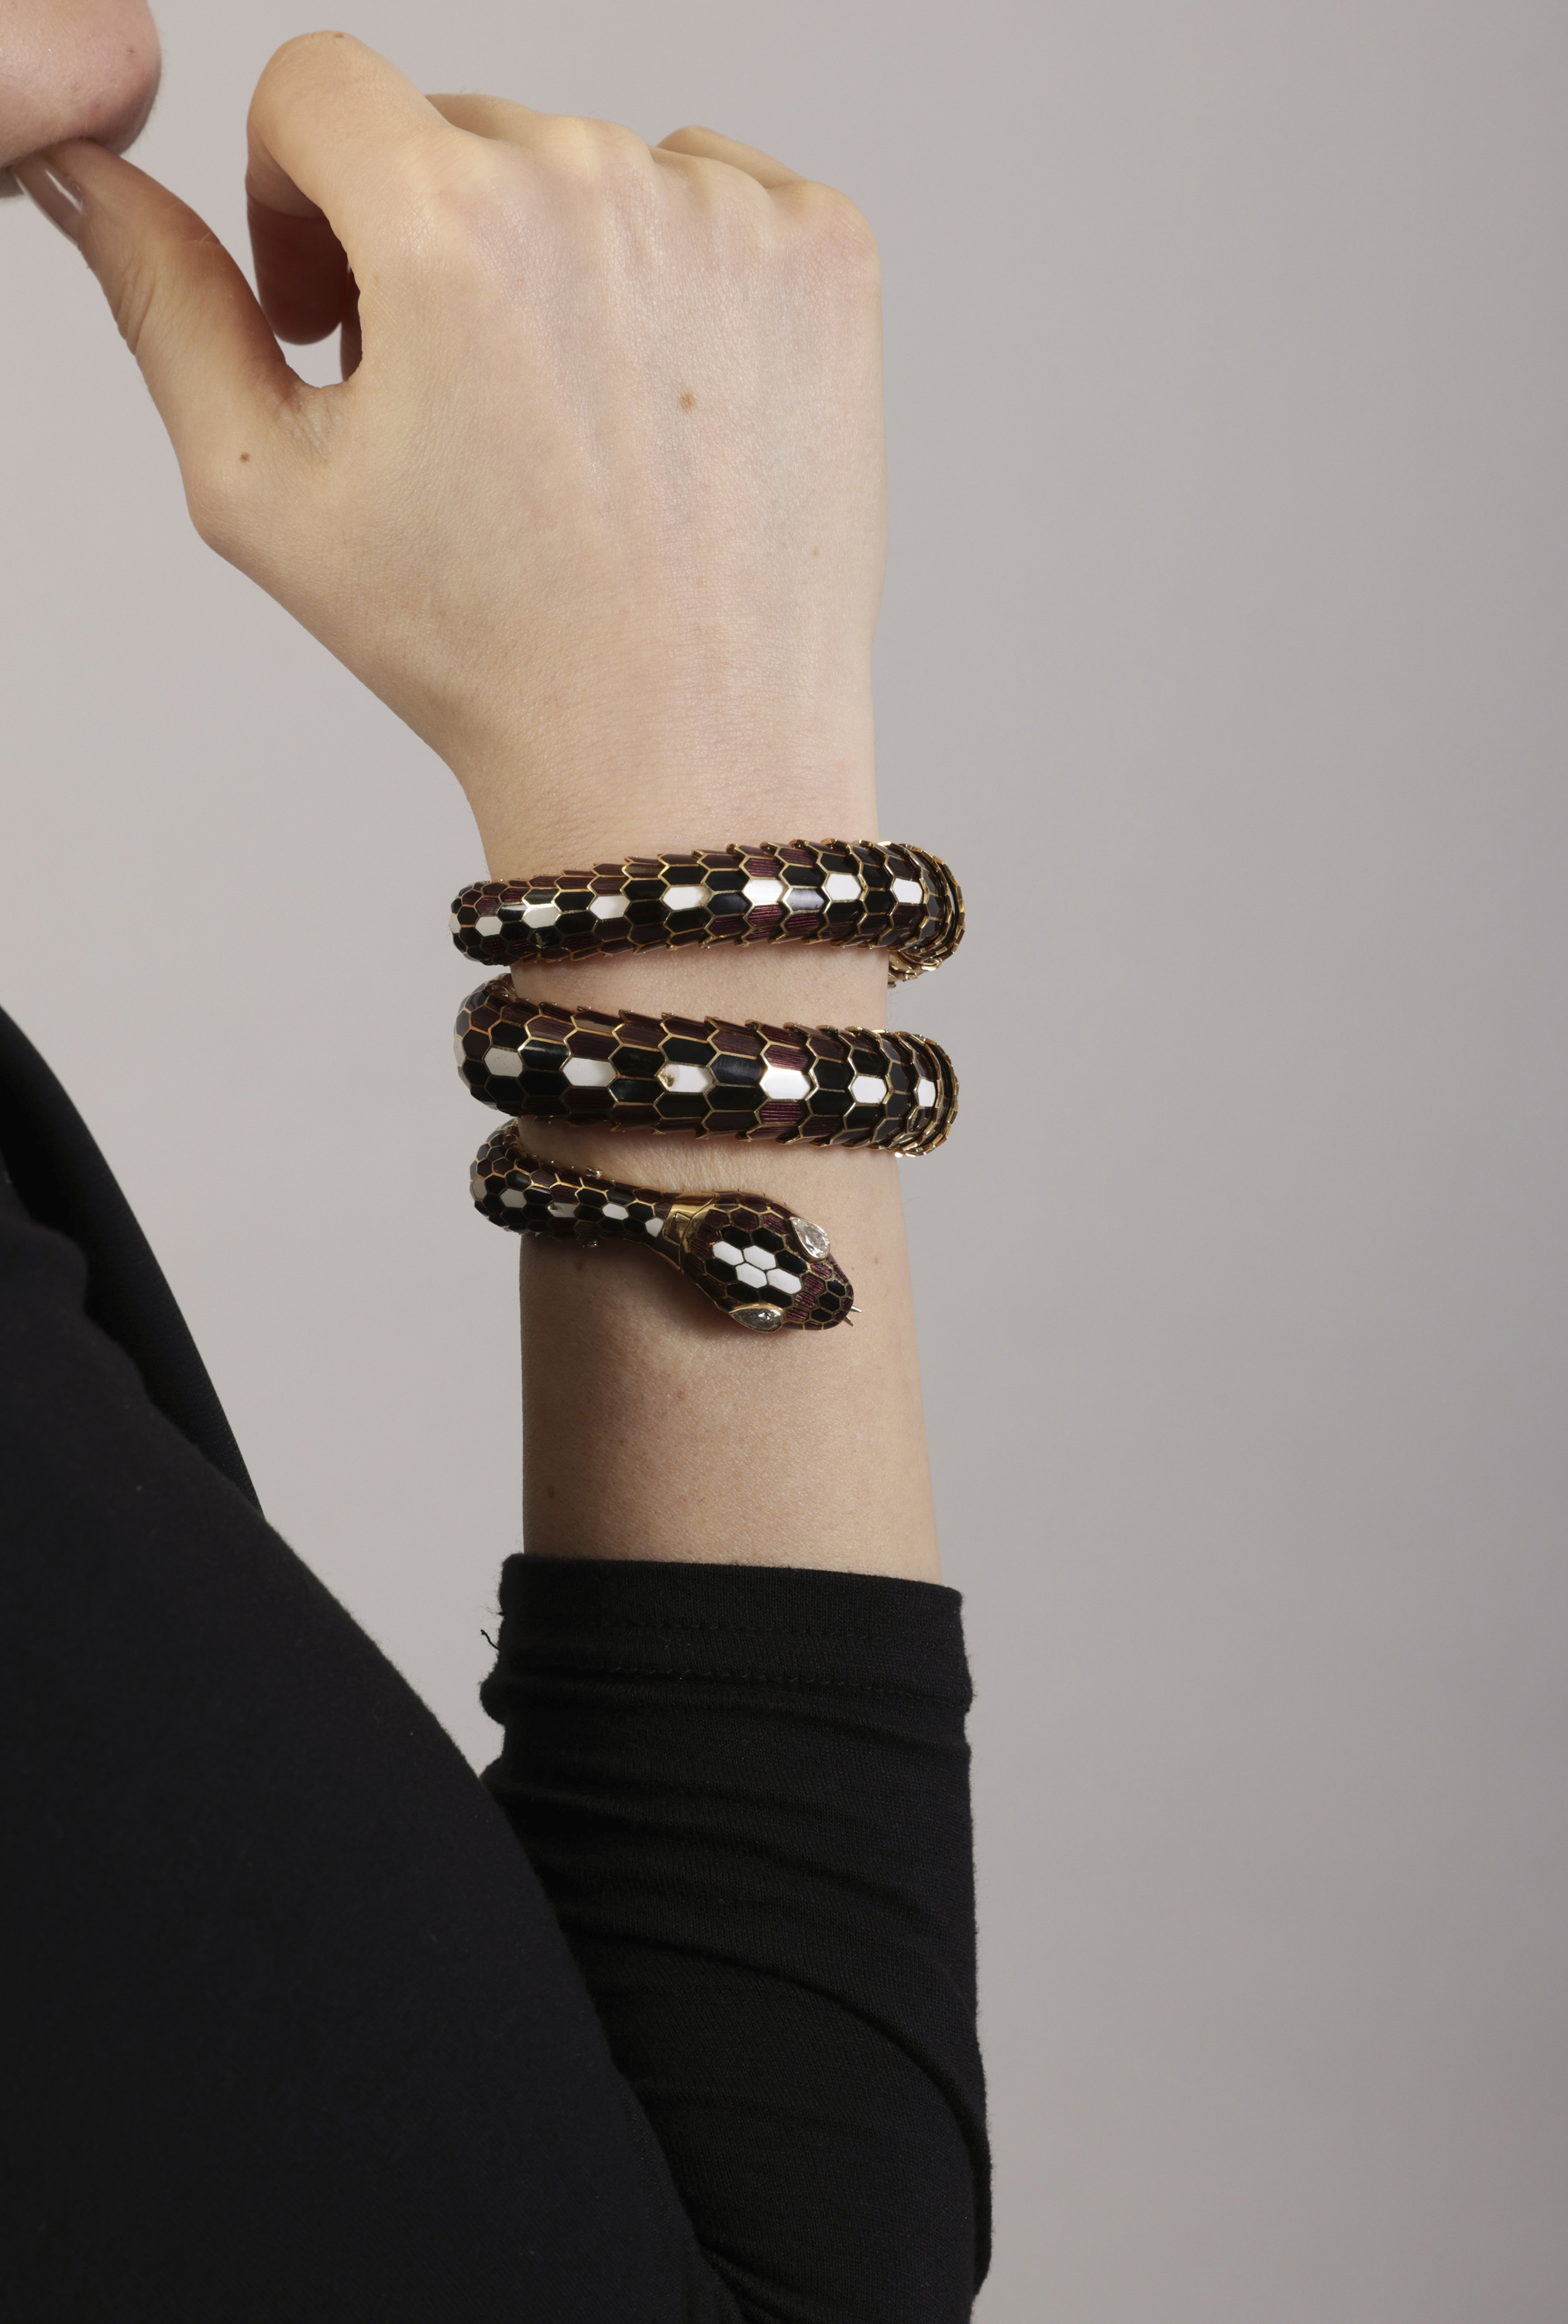 A RARE AND COLLECTIBLE 'SERPENTI' BRACELET WATCH, BY BULGARI, CIRCA 1960 Designed as a snake, the - Image 13 of 14